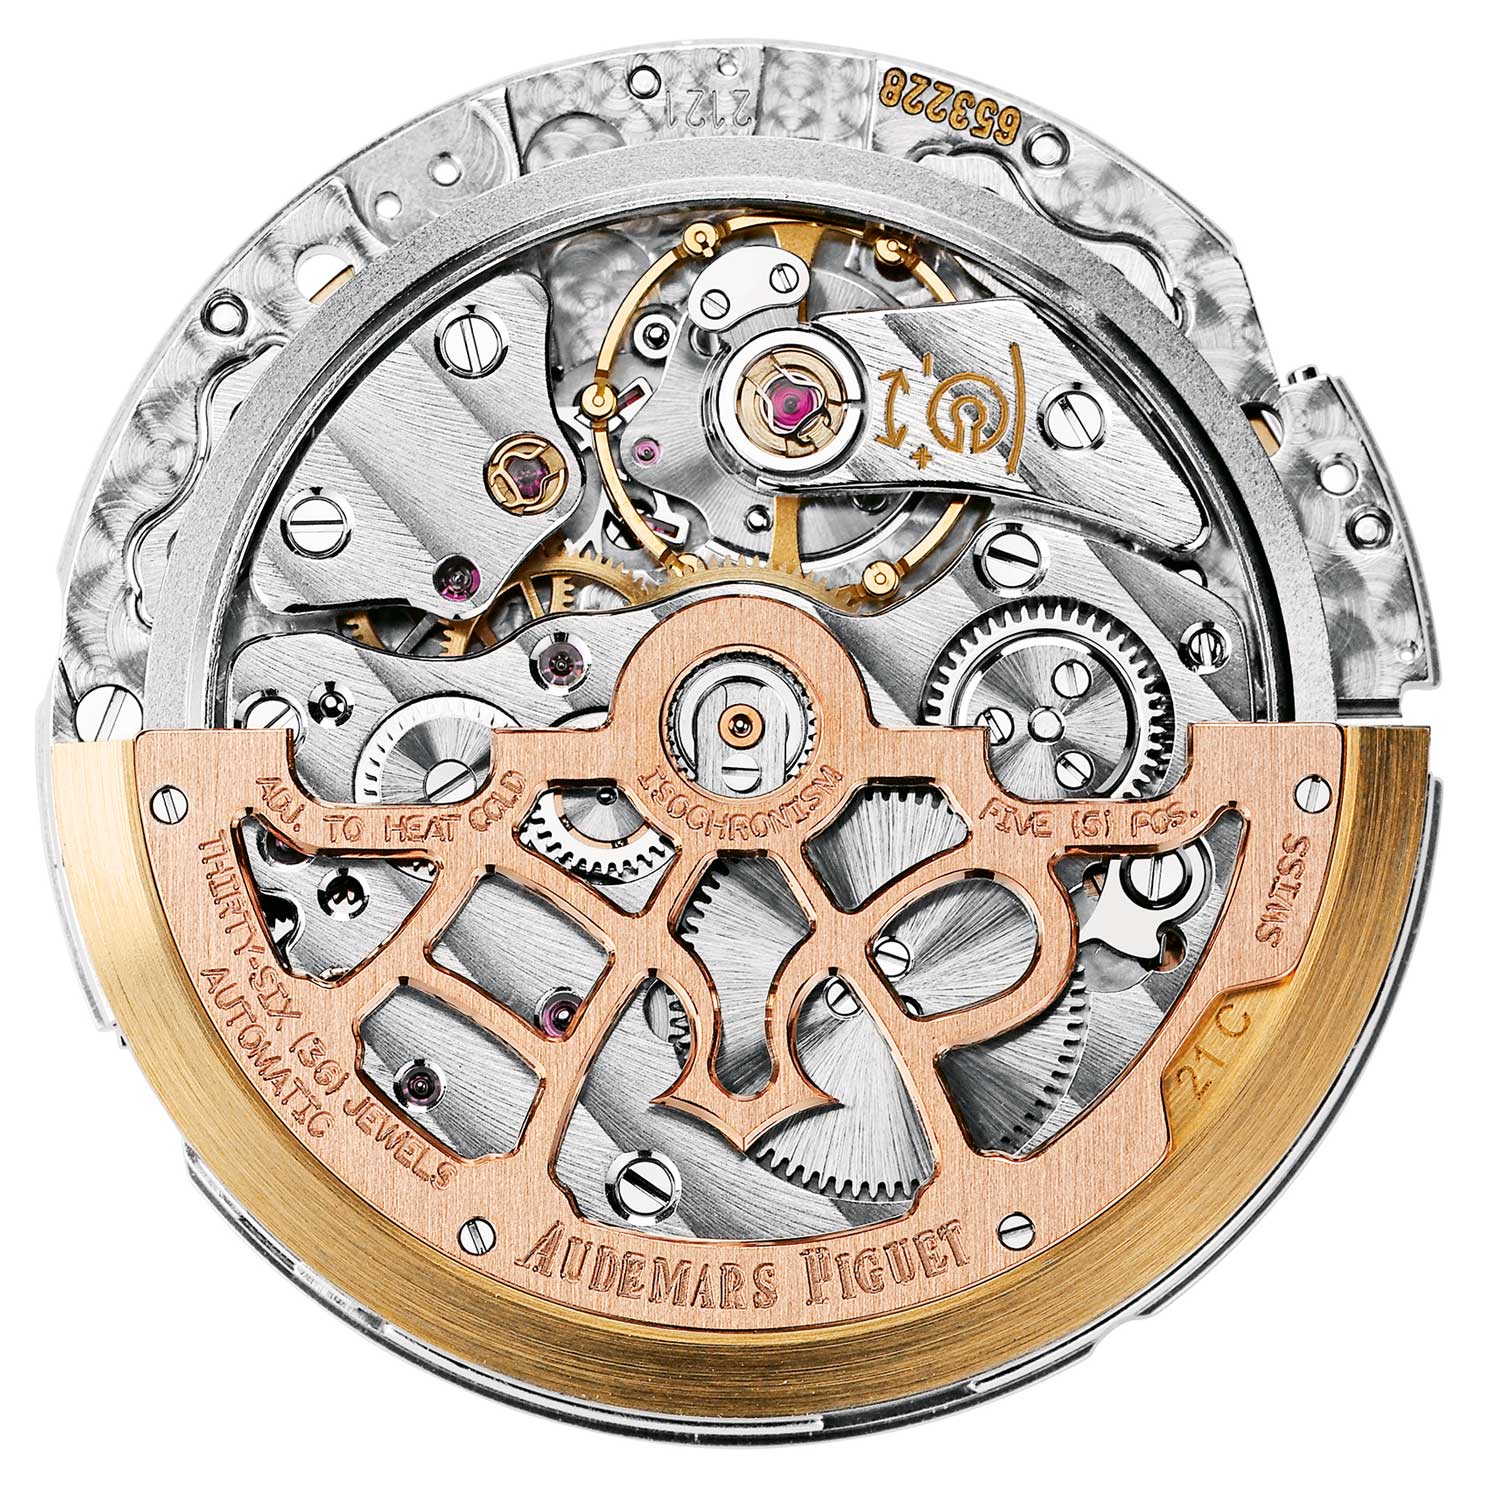 Made exclusively by Audemars Piguet, but based off the Jaeger-LeCoultre caliber 920, is this movement in-house?